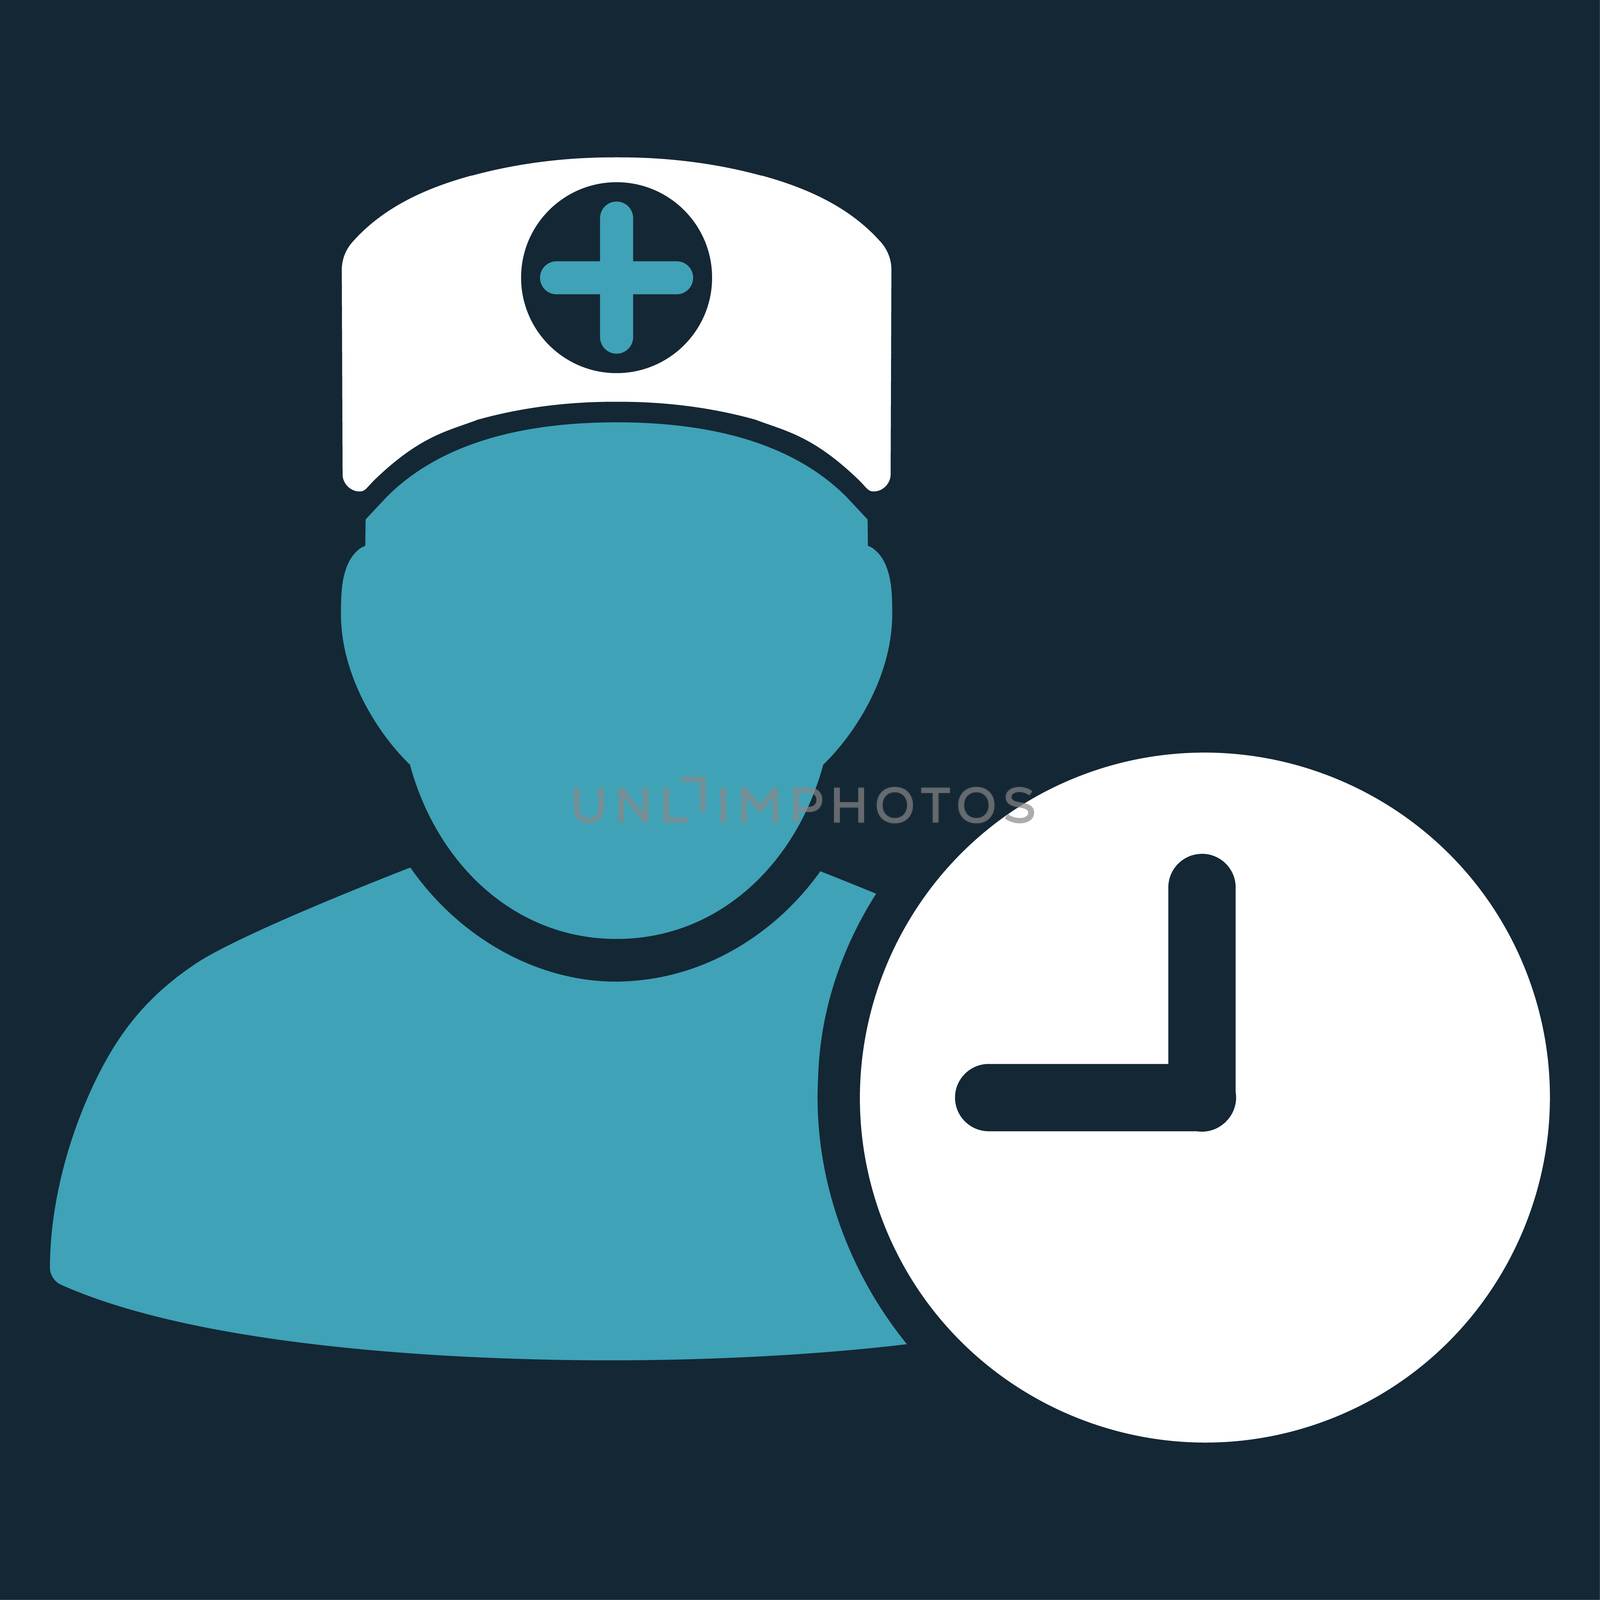 Doctor Schedule raster icon. Style is bicolor flat symbol, blue and white colors, rounded angles, dark blue background.